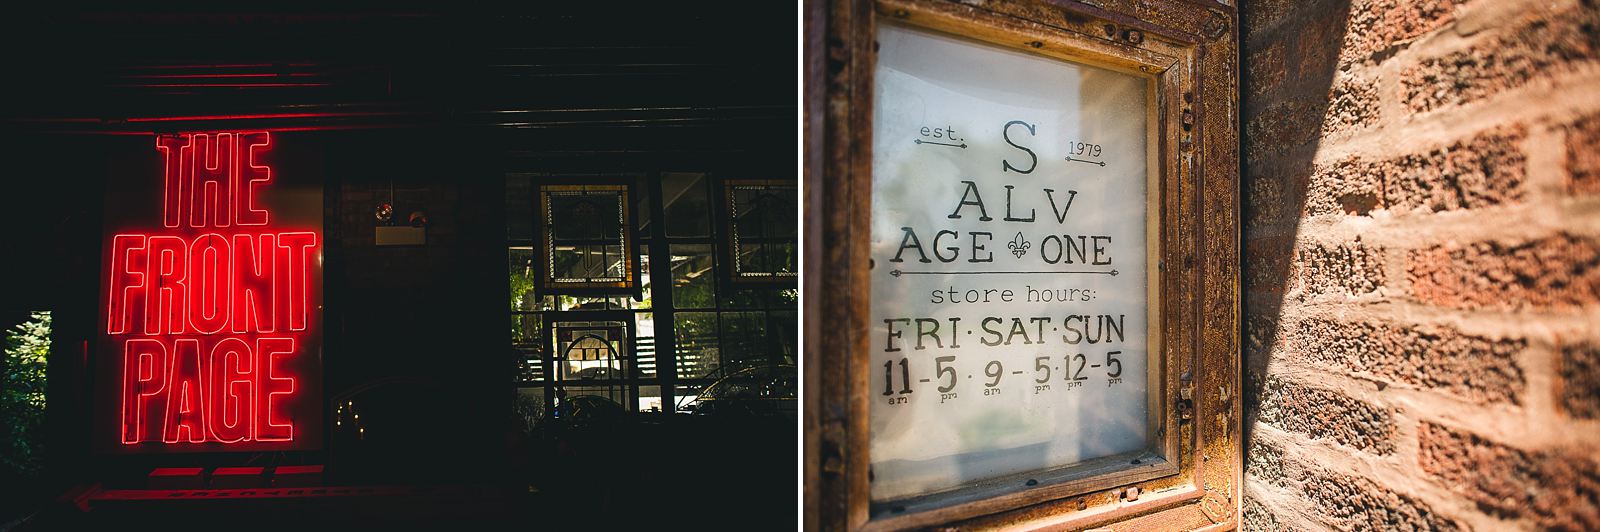 02 salvage one outdoors photo - Salvage One Wedding // Pearl + Ken